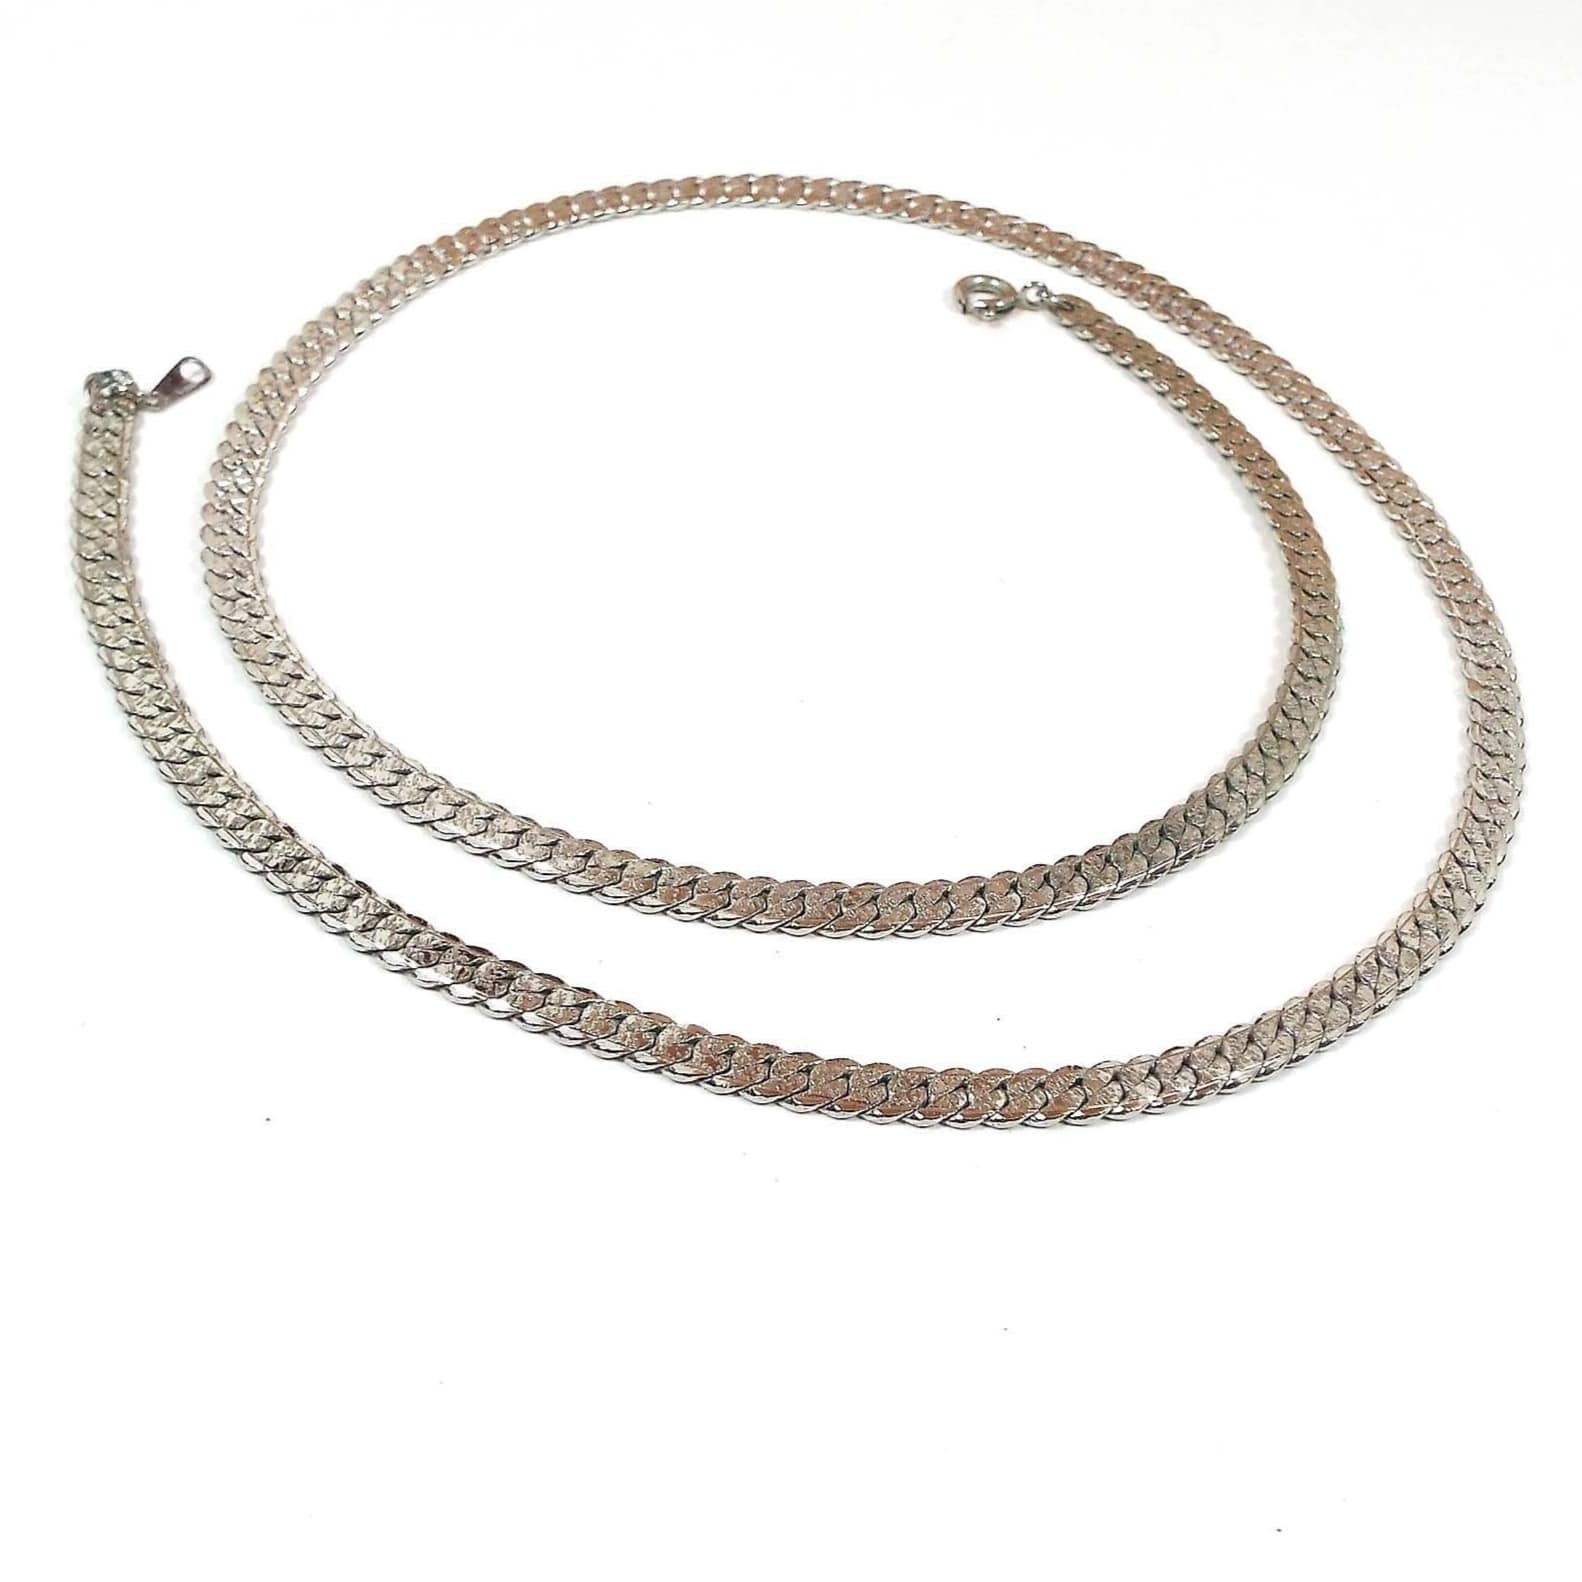 Chain is silver in color with cuban link style. Links are faceted round and sit flat.